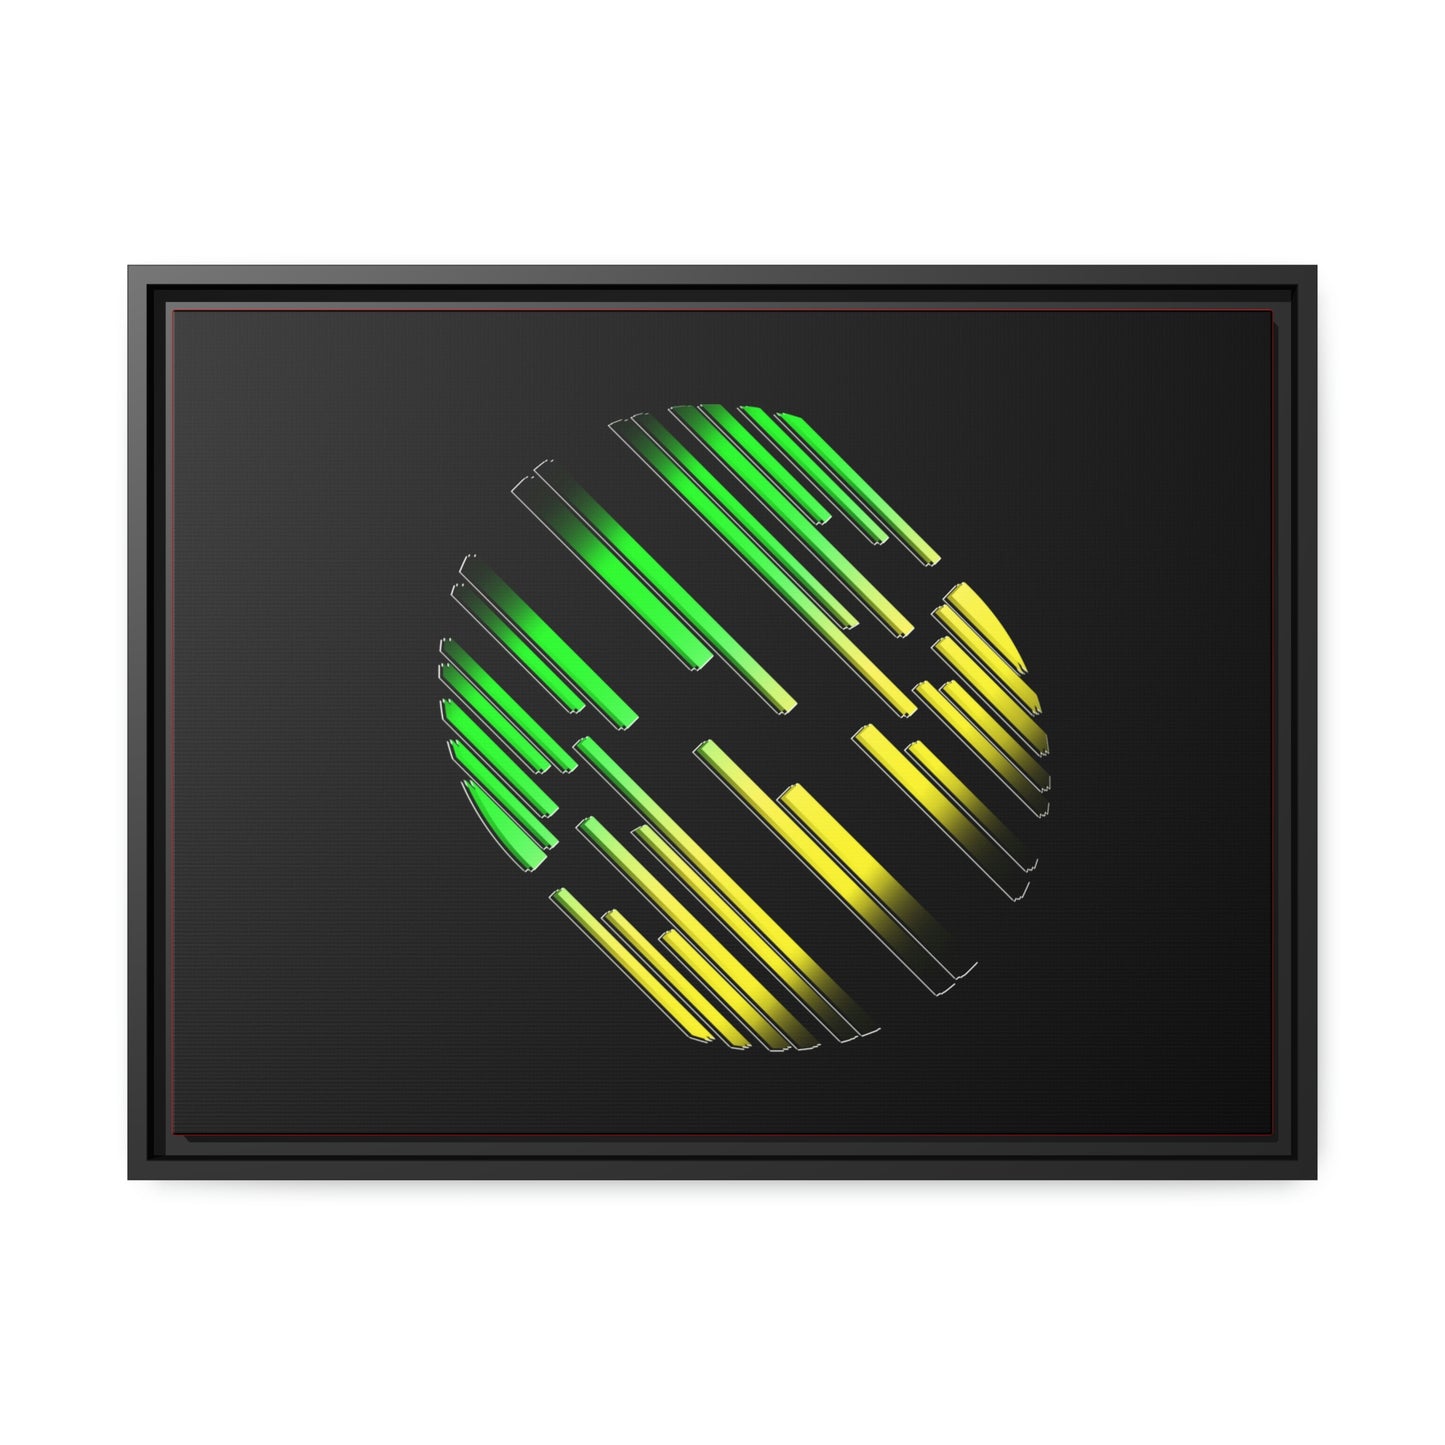 Digital Abstract Art with Jamaican Colors.